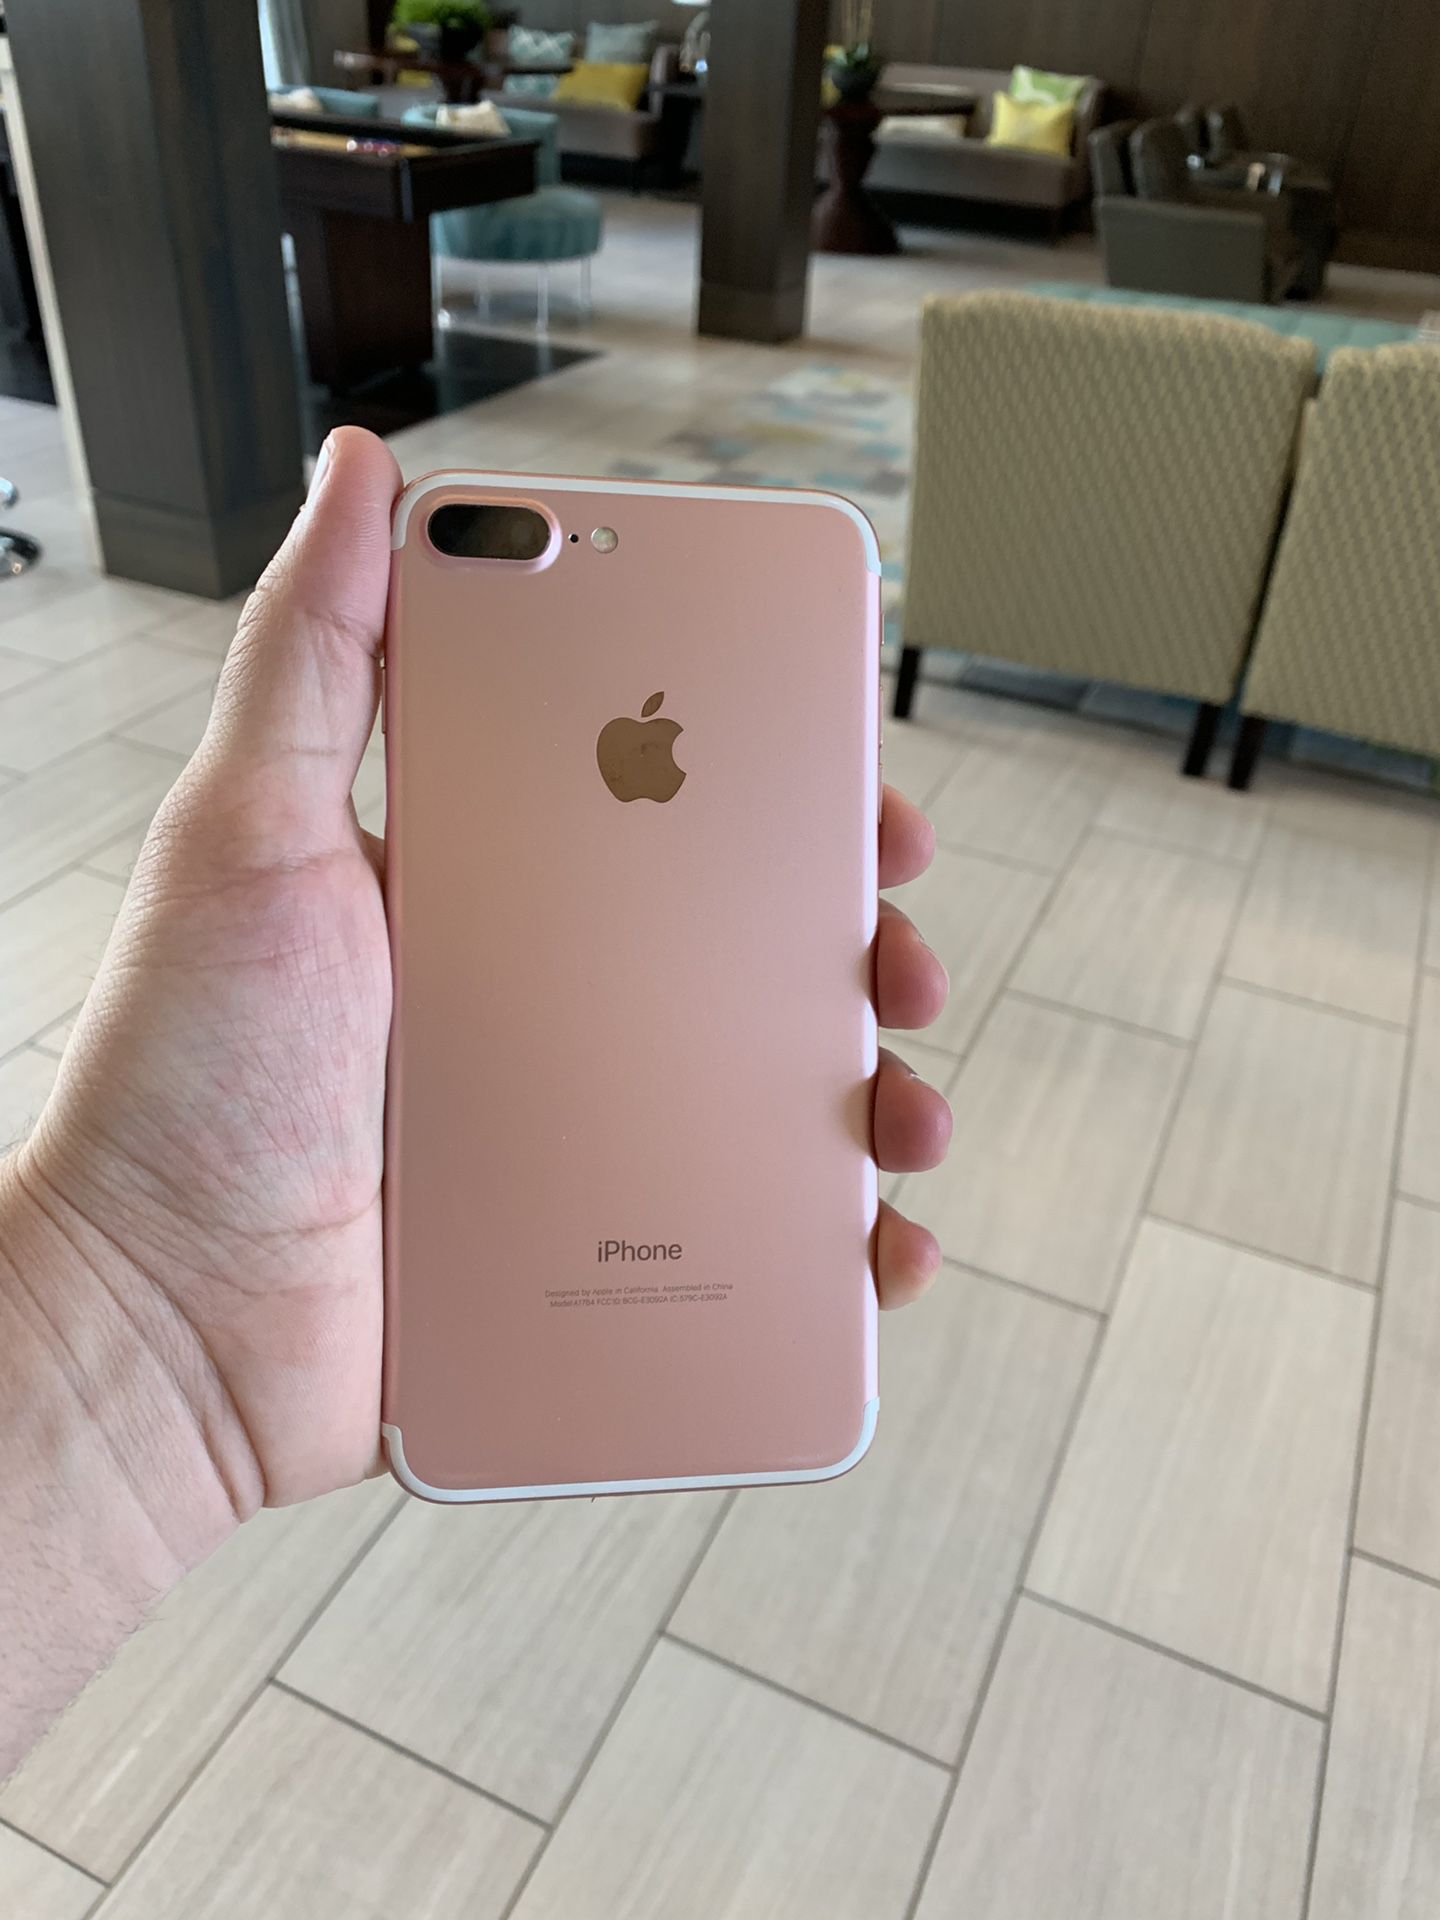 IPhone 7 Plus 128 GB {AT&T and Cricket}